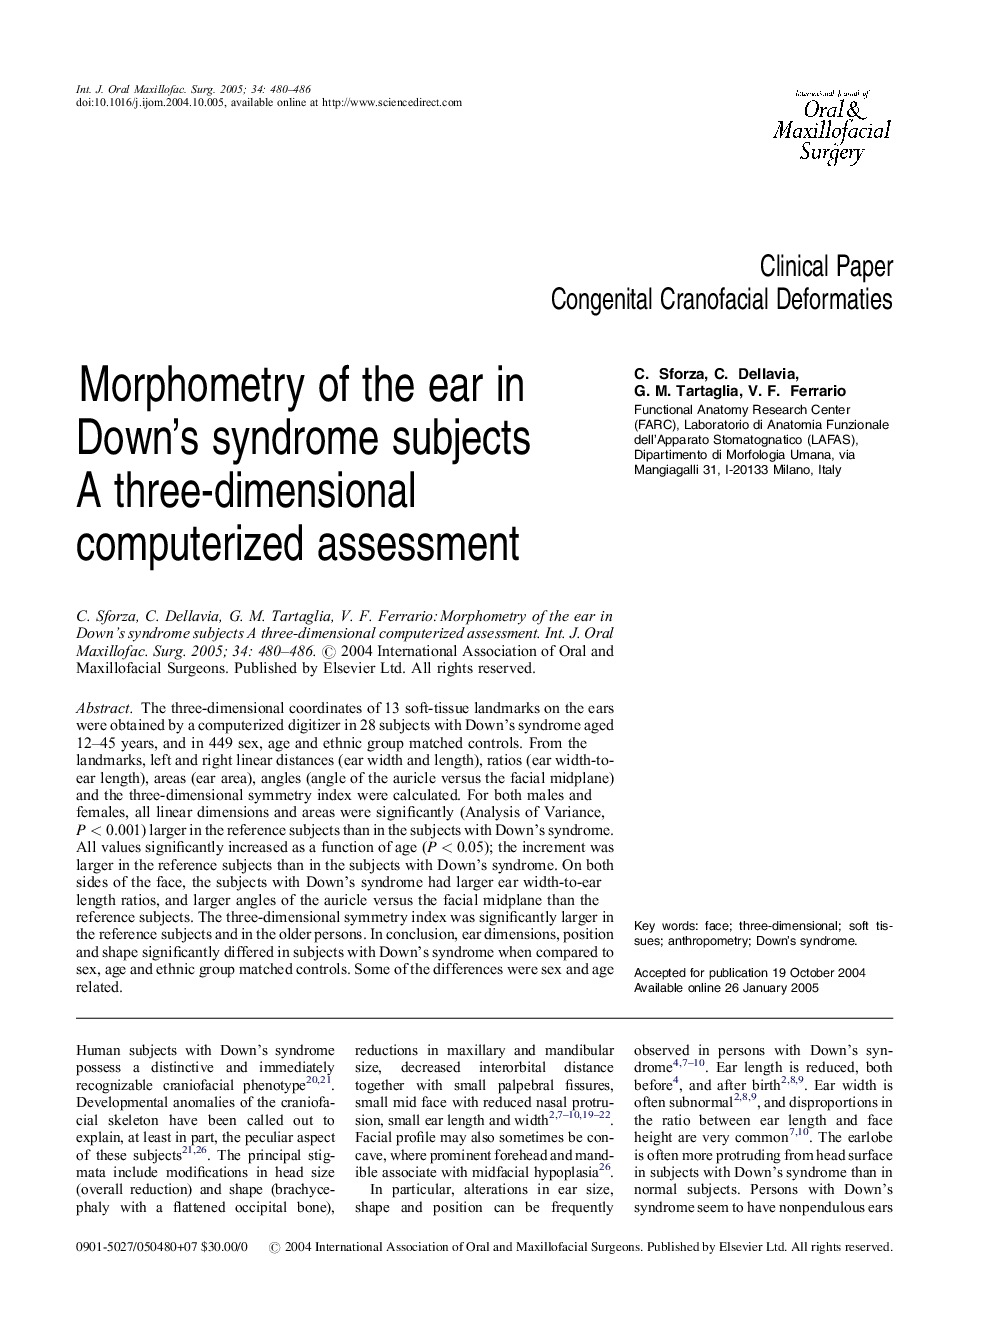 Morphometry of the ear in Down's syndrome subjects